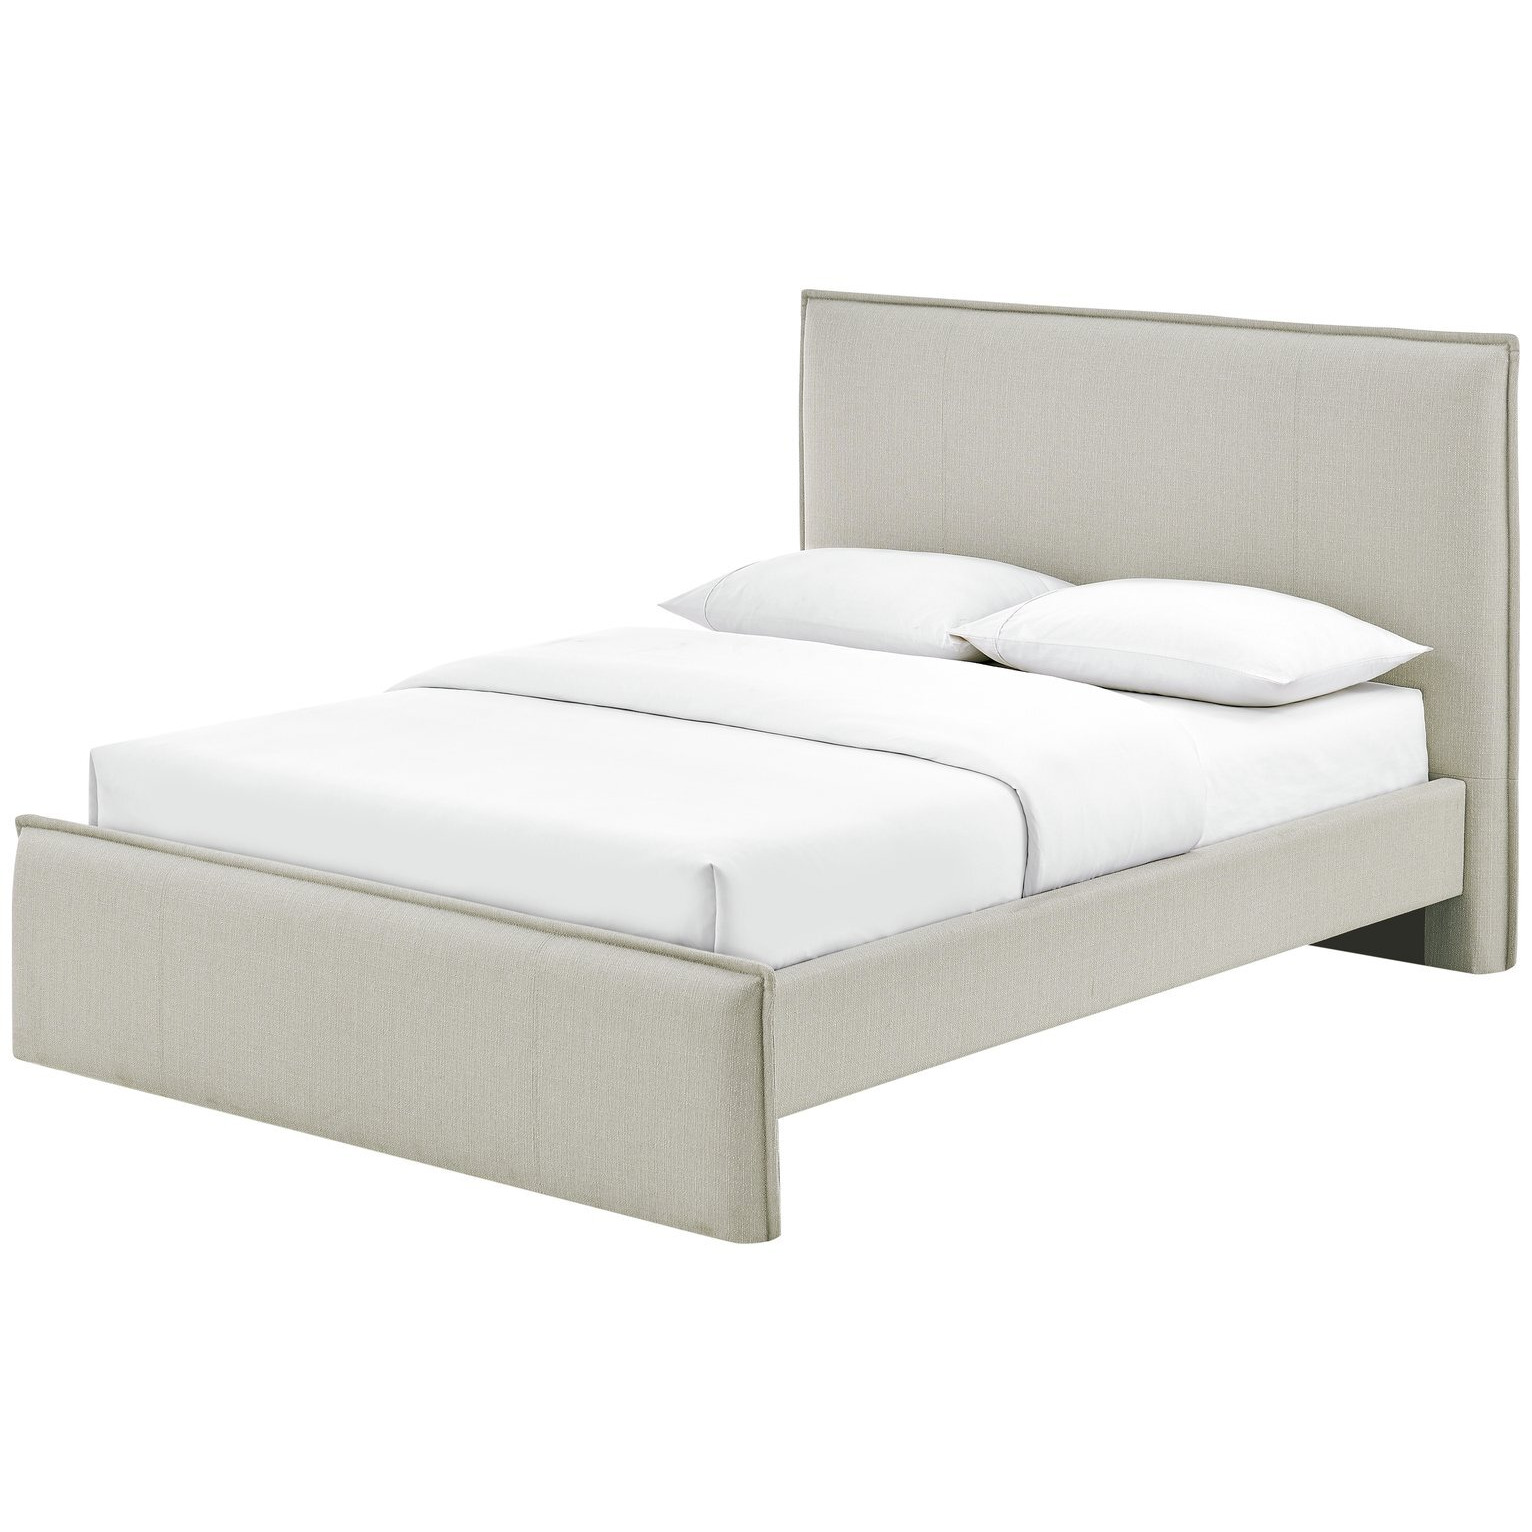 Habitat Herbie Double Fabric Bed Frame - Natural - image 1